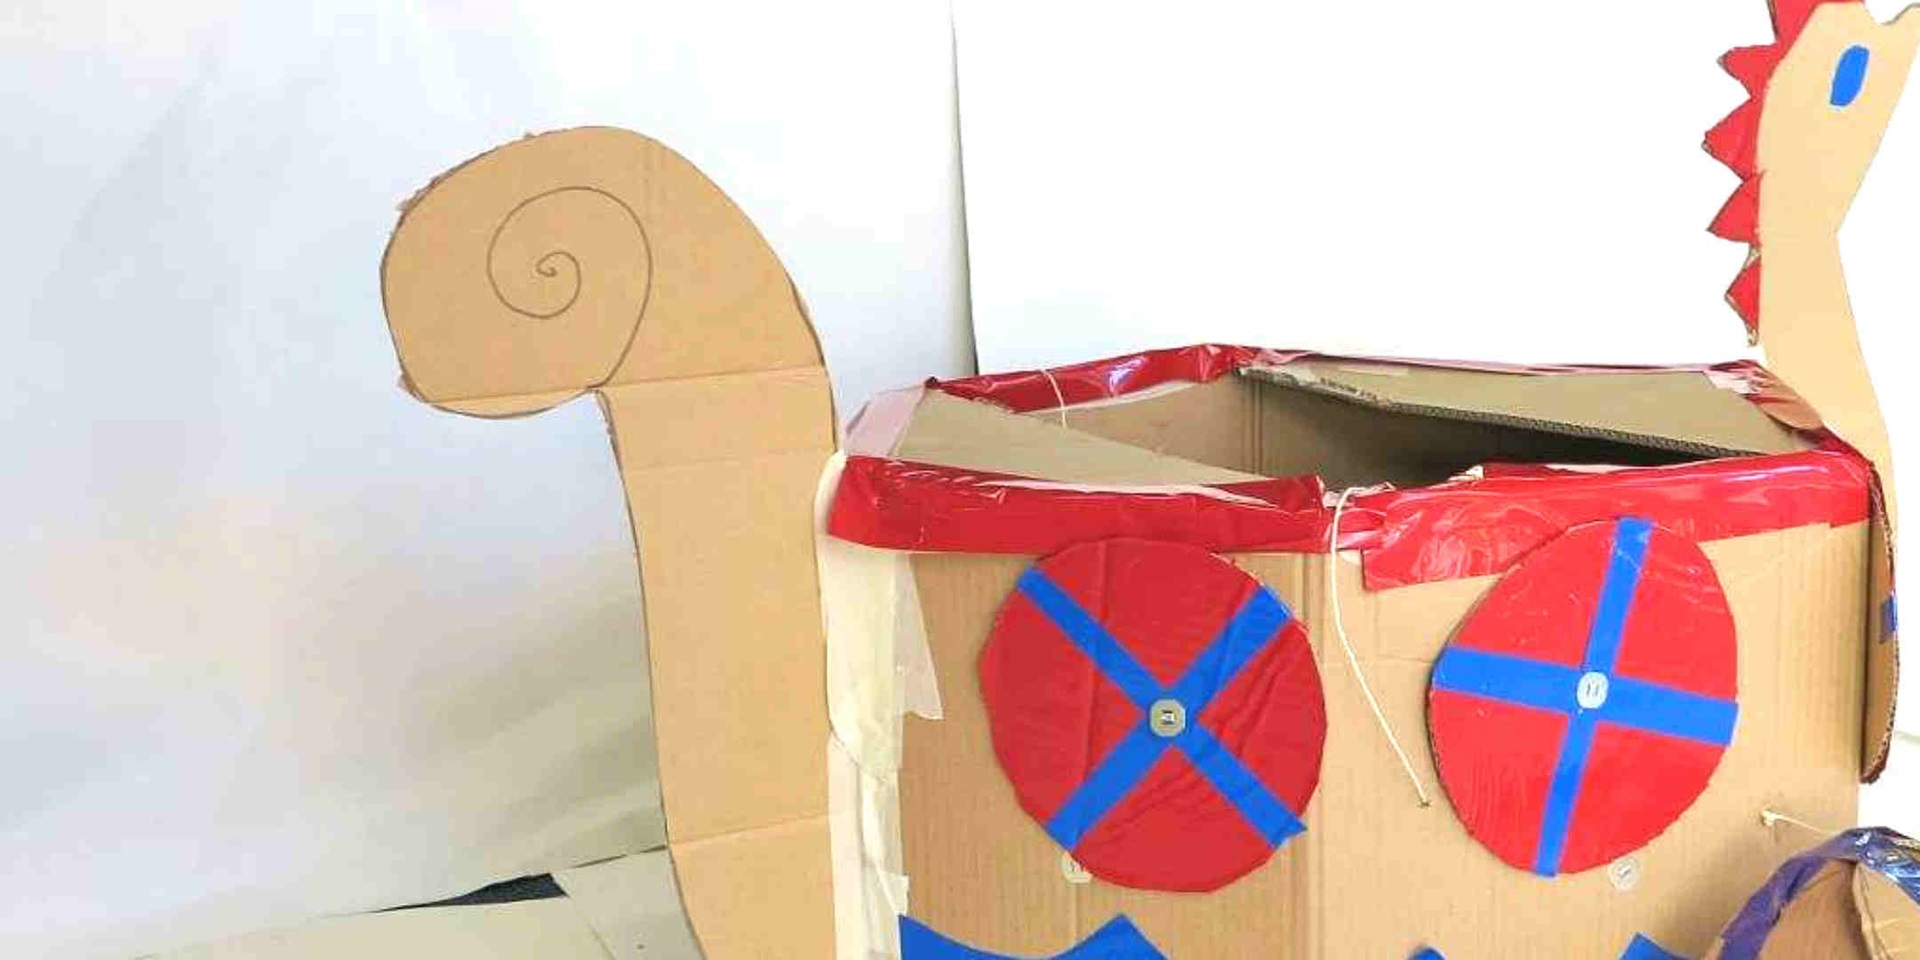 Re-use a cardboard boxes to make a fearsome viking boat, helmet and sword!